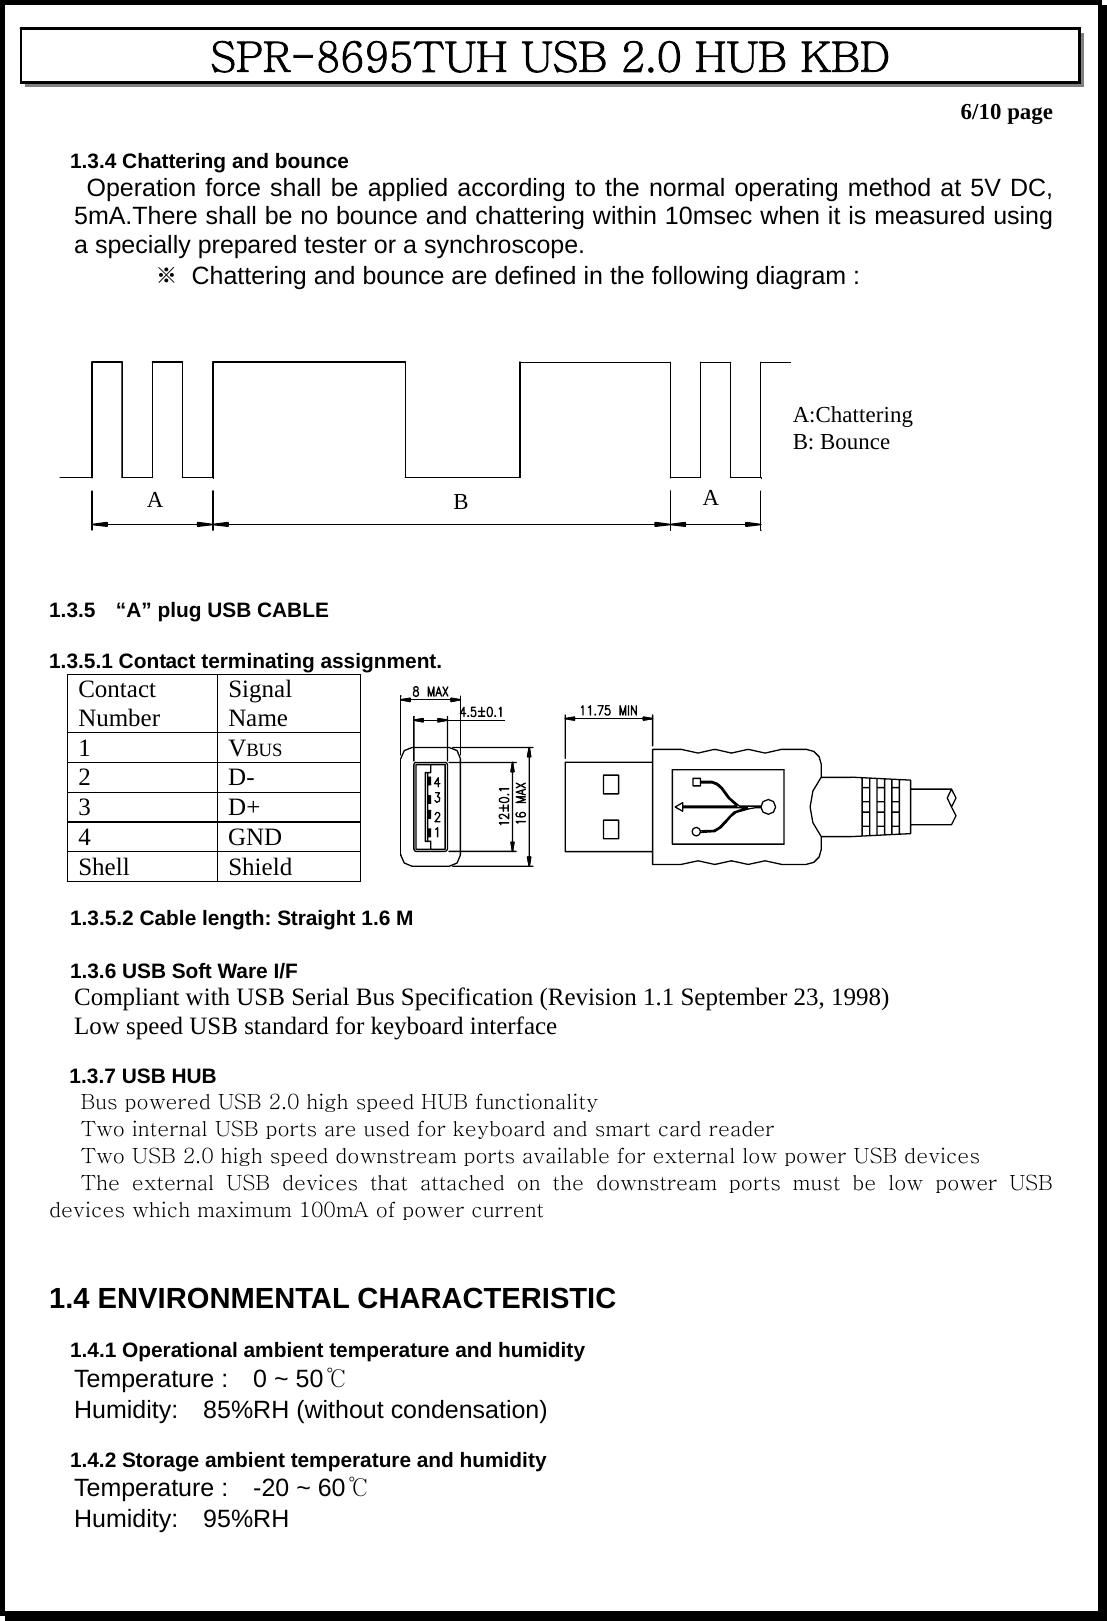    6/10 page SPR-8695TUH USB 2.0 HUB KBD  1.3.4 Chattering and bounce Operation force shall be applied according to the normal operating method at 5V DC, 5mA.There shall be no bounce and chattering within 10msec when it is measured using a specially prepared tester or a synchroscope. ※  Chattering and bounce are defined in the following diagram :     A:Chattering B: Bounce ABA   1.3.5  “A” plug USB CABLE  1.3.5.1 Contact terminating assignment. Contact Number  Signal Name   1 VBUS  2 D-  3 D+  4 GND  Shell Shield     1.3.5.2 Cable length: Straight 1.6 M  1.3.6 USB Soft Ware I/F Compliant with USB Serial Bus Specification (Revision 1.1 September 23, 1998) Low speed USB standard for keyboard interface  1.3.7 USB HUB       Bus powered USB 2.0 high speed HUB functionality       Two internal USB ports are used for keyboard and smart card reader       Two USB 2.0 high speed downstream ports available for external low power USB devices       The  external  USB  devices  that  attached  on  the  downstream  ports must be low power USB devices which maximum 100mA of power current   1.4 ENVIRONMENTAL CHARACTERISTIC  1.4.1 Operational ambient temperature and humidity Temperature :    0 ~ 50℃ Humidity:  85%RH (without condensation)  1.4.2 Storage ambient temperature and humidity Temperature :  -20 ~ 60℃ Humidity:  95%RH 